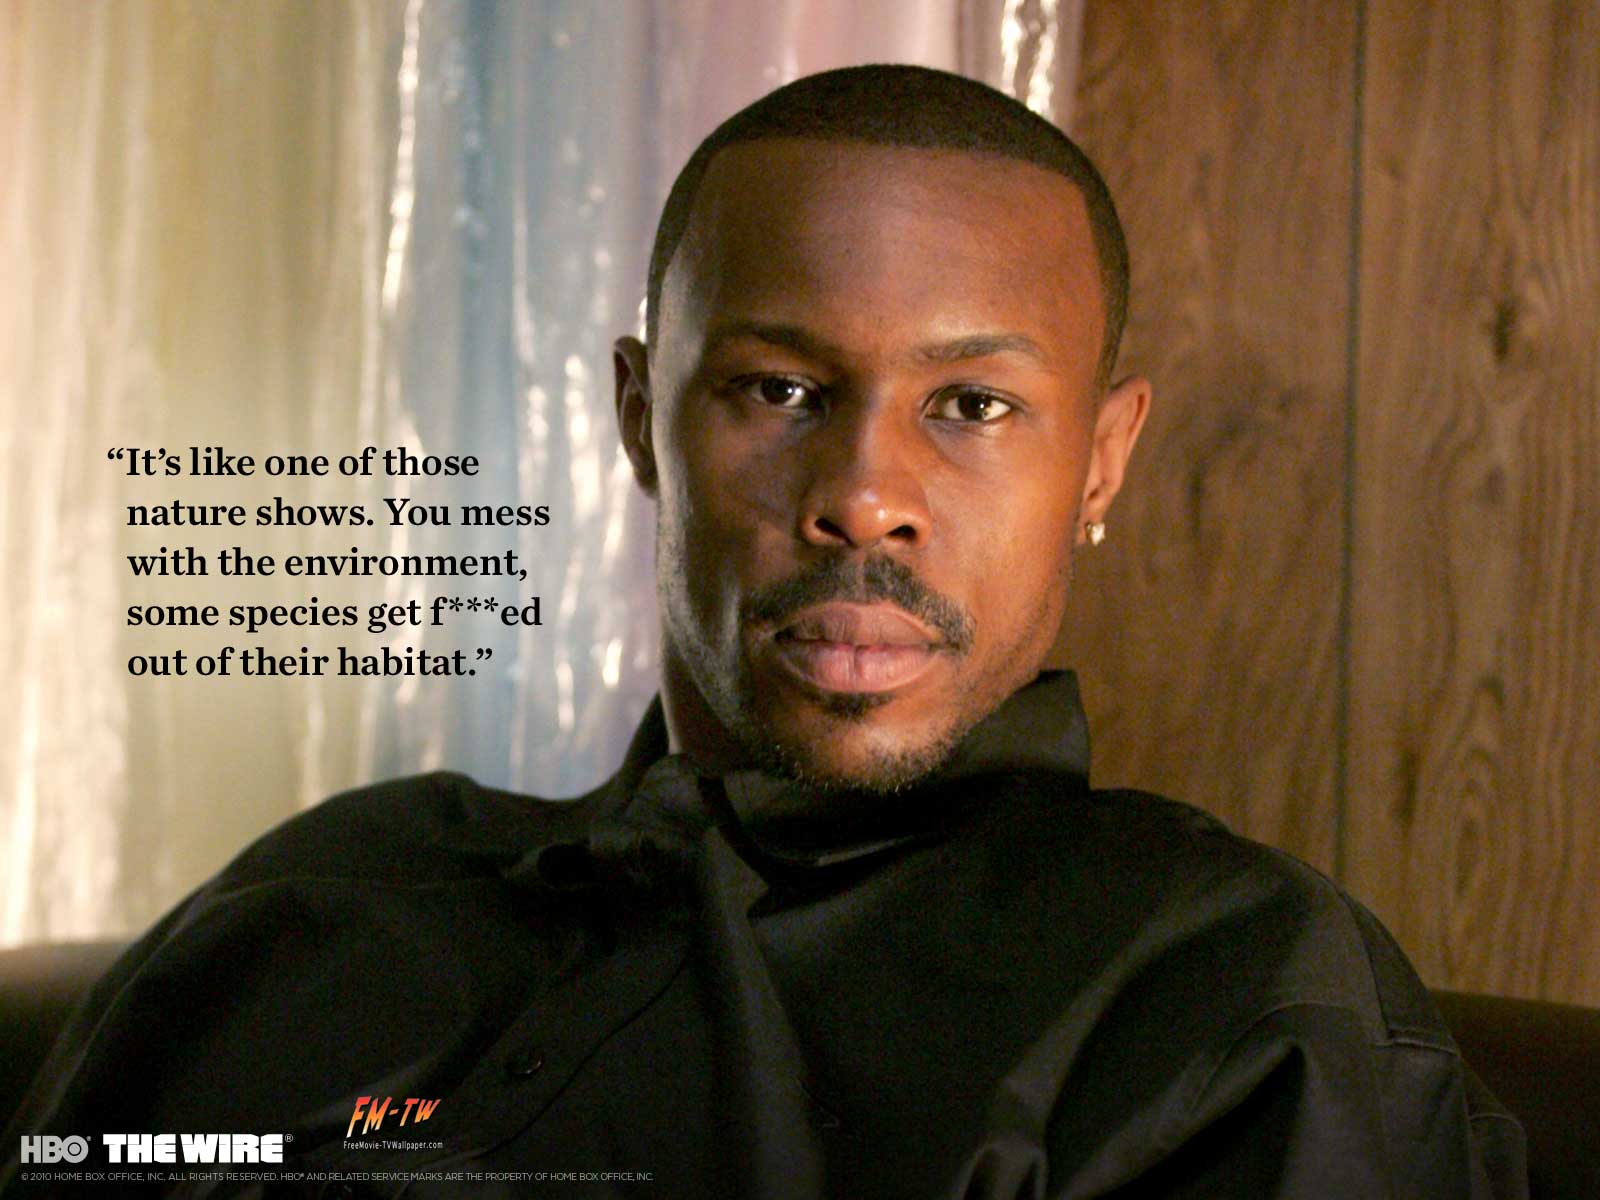 best image about The Wire. Little quotes, Search